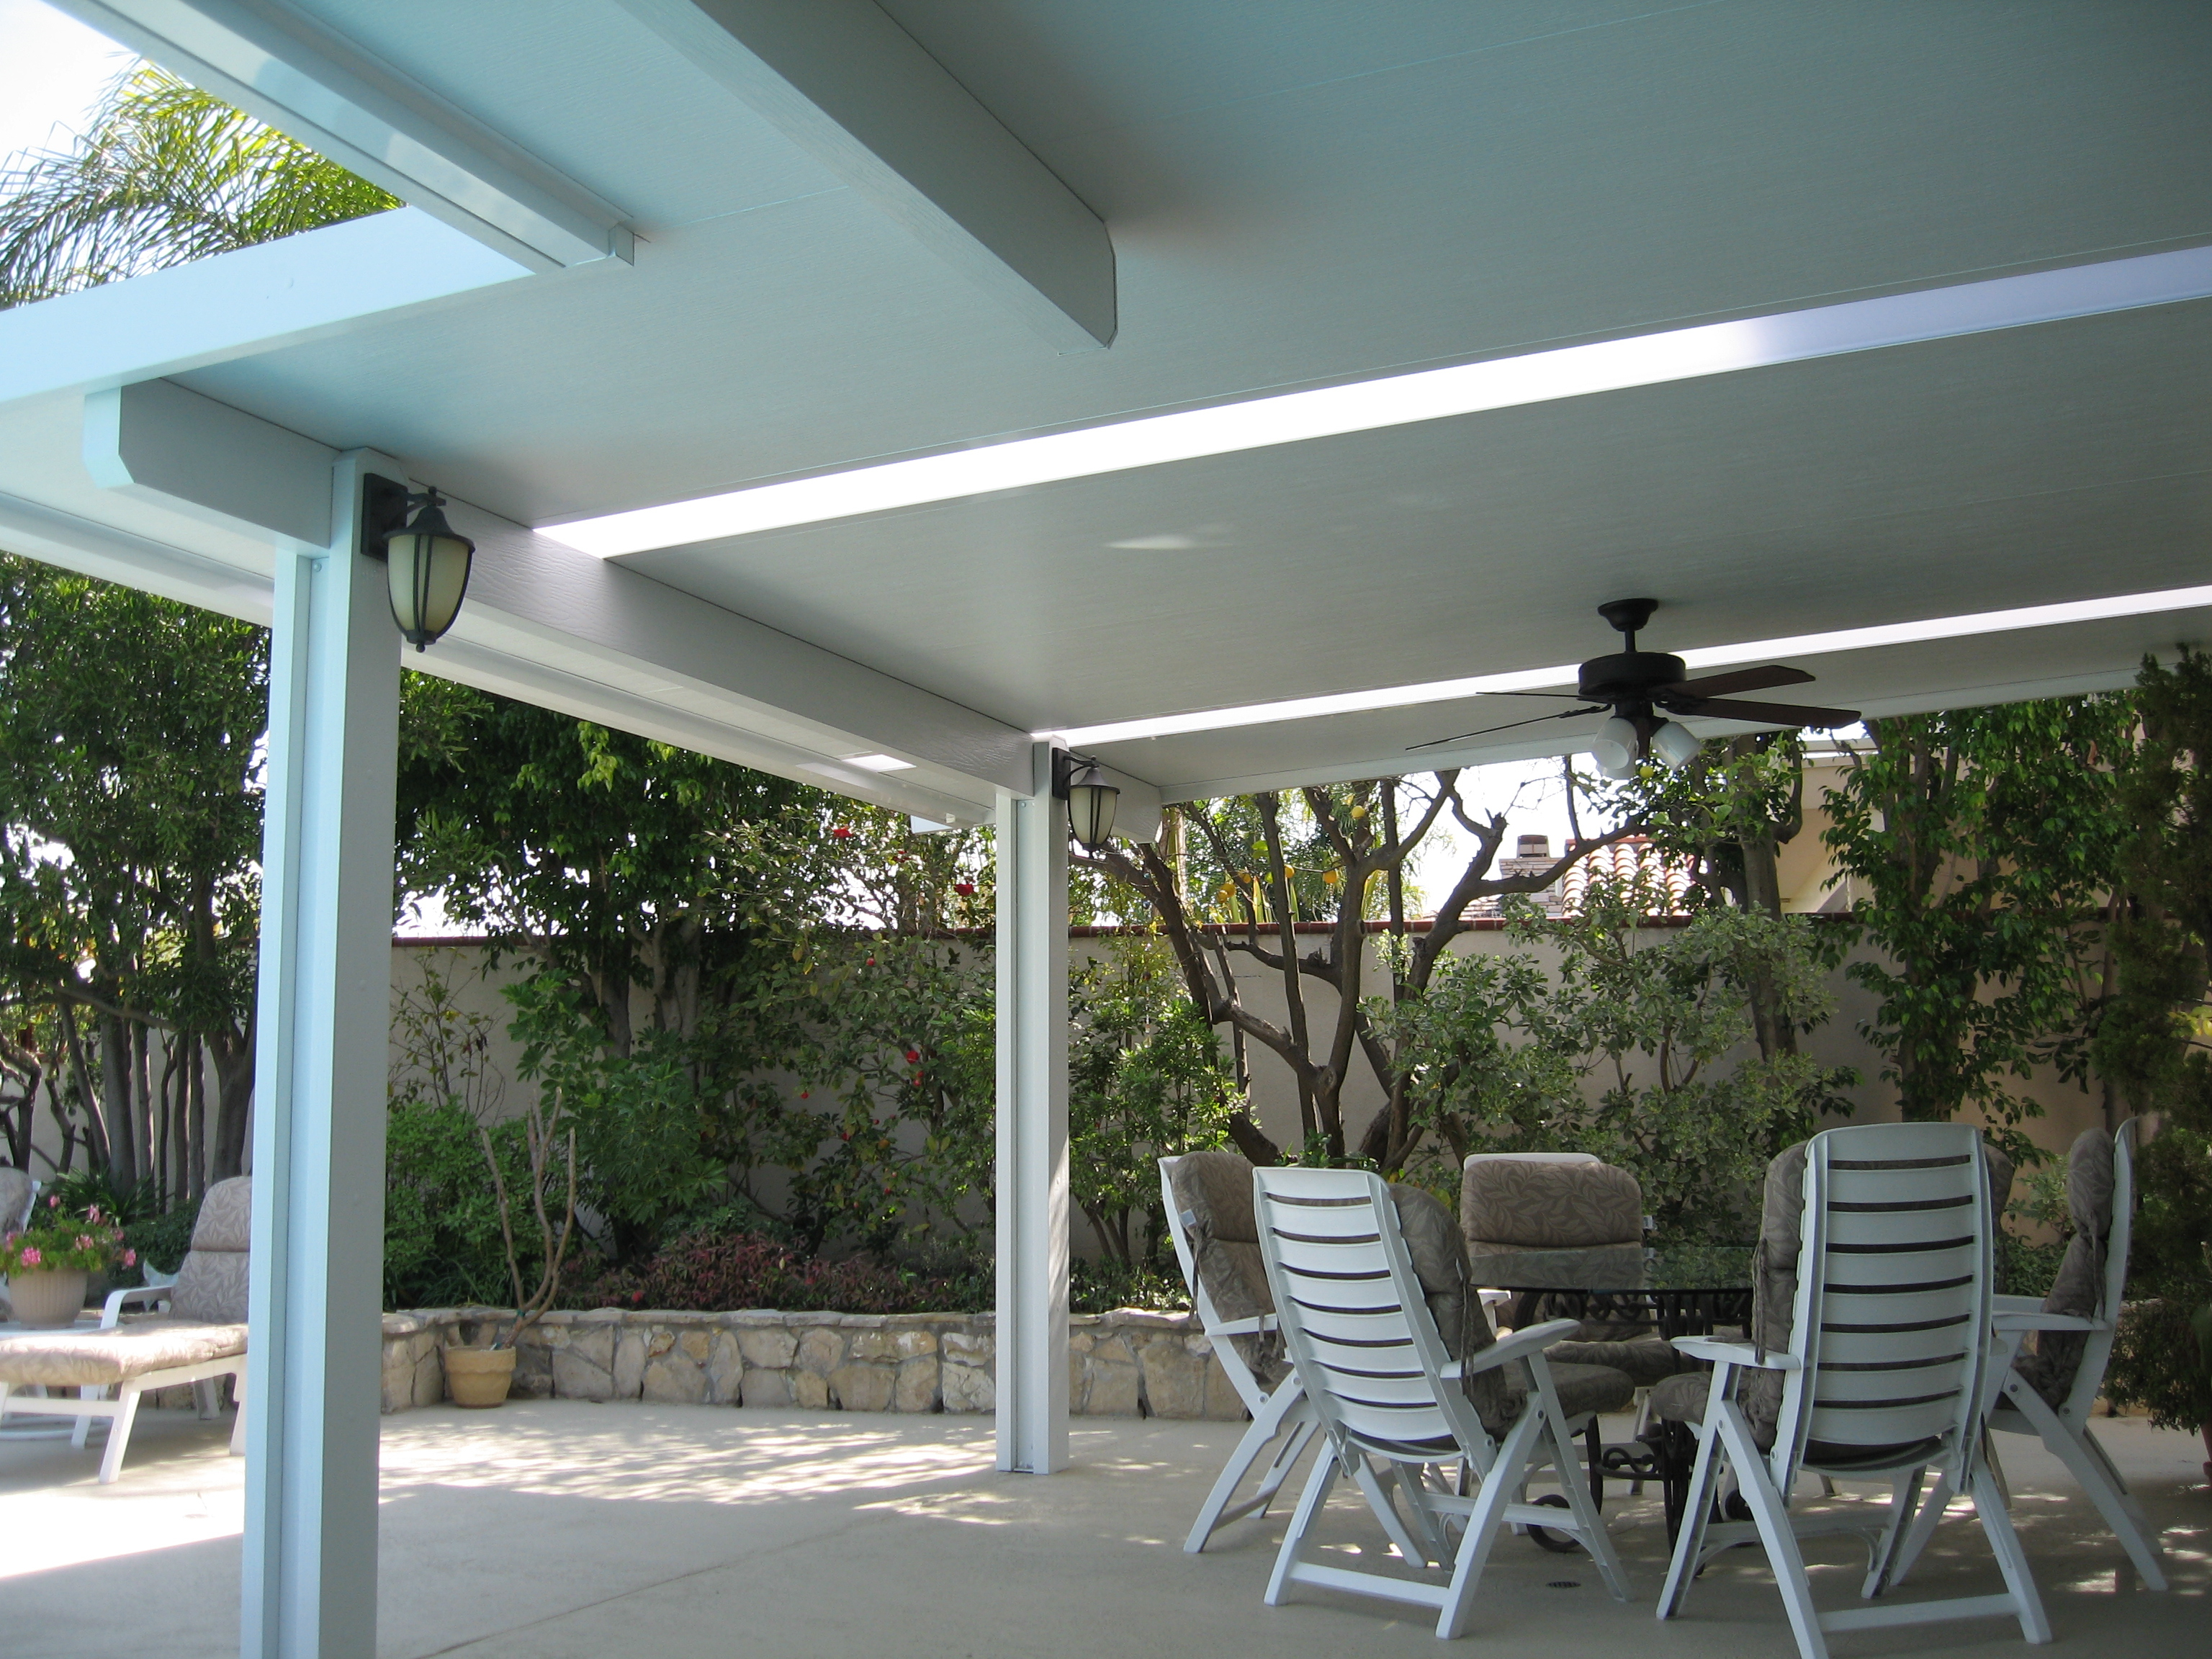 Aluminum Patio Covers In Los Angeles Orange County intended for measurements 3072 X 2304